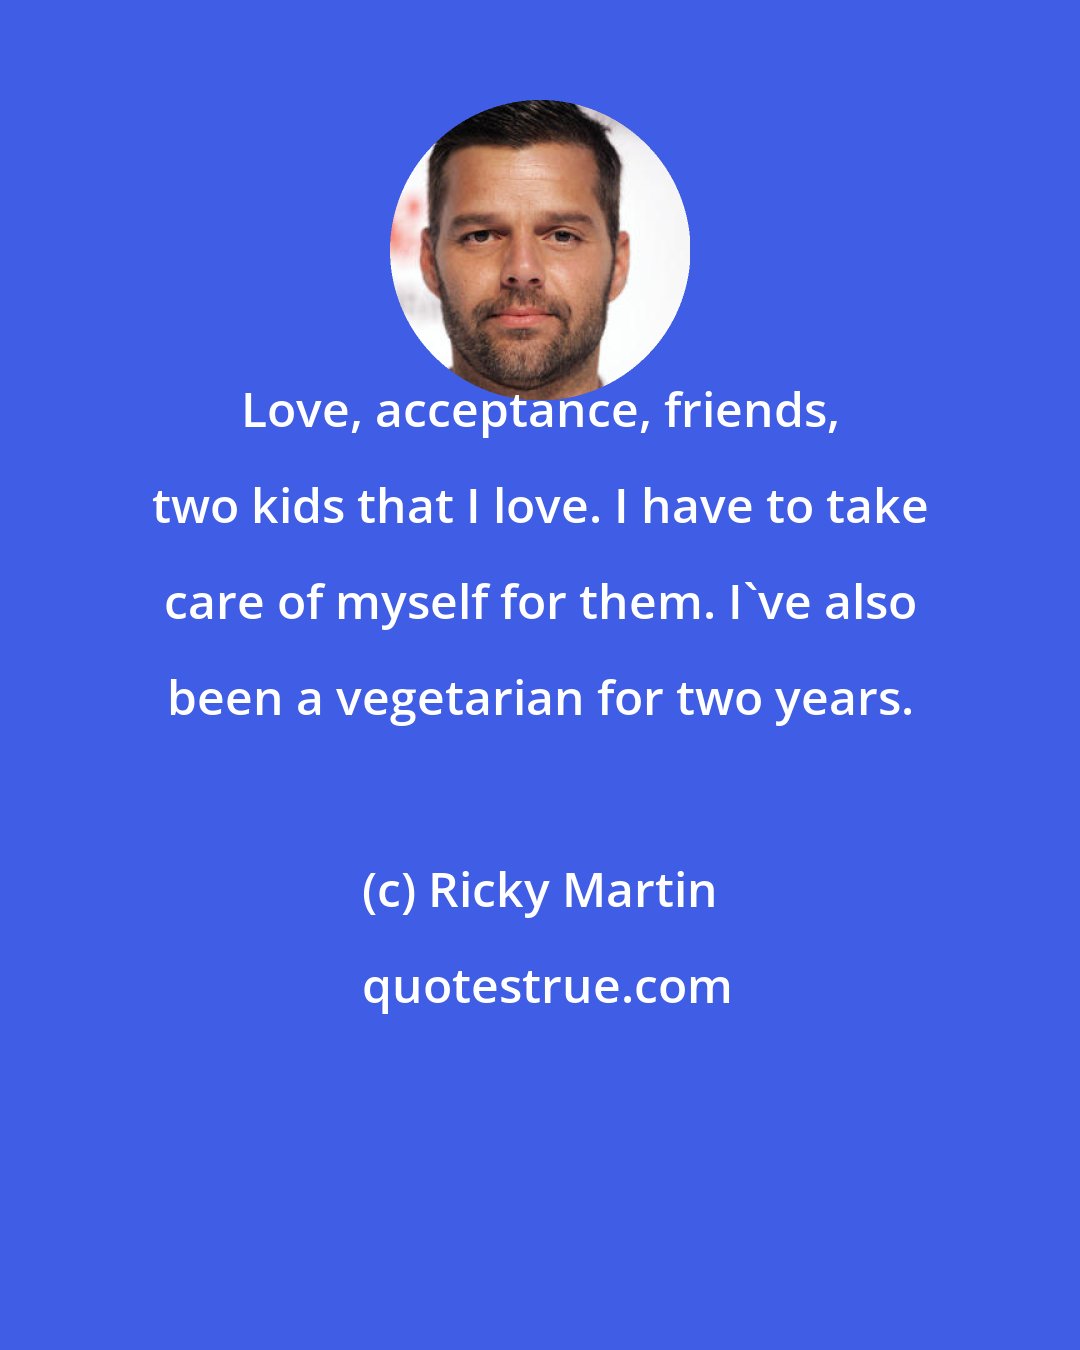 Ricky Martin: Love, acceptance, friends, two kids that I love. I have to take care of myself for them. I've also been a vegetarian for two years.